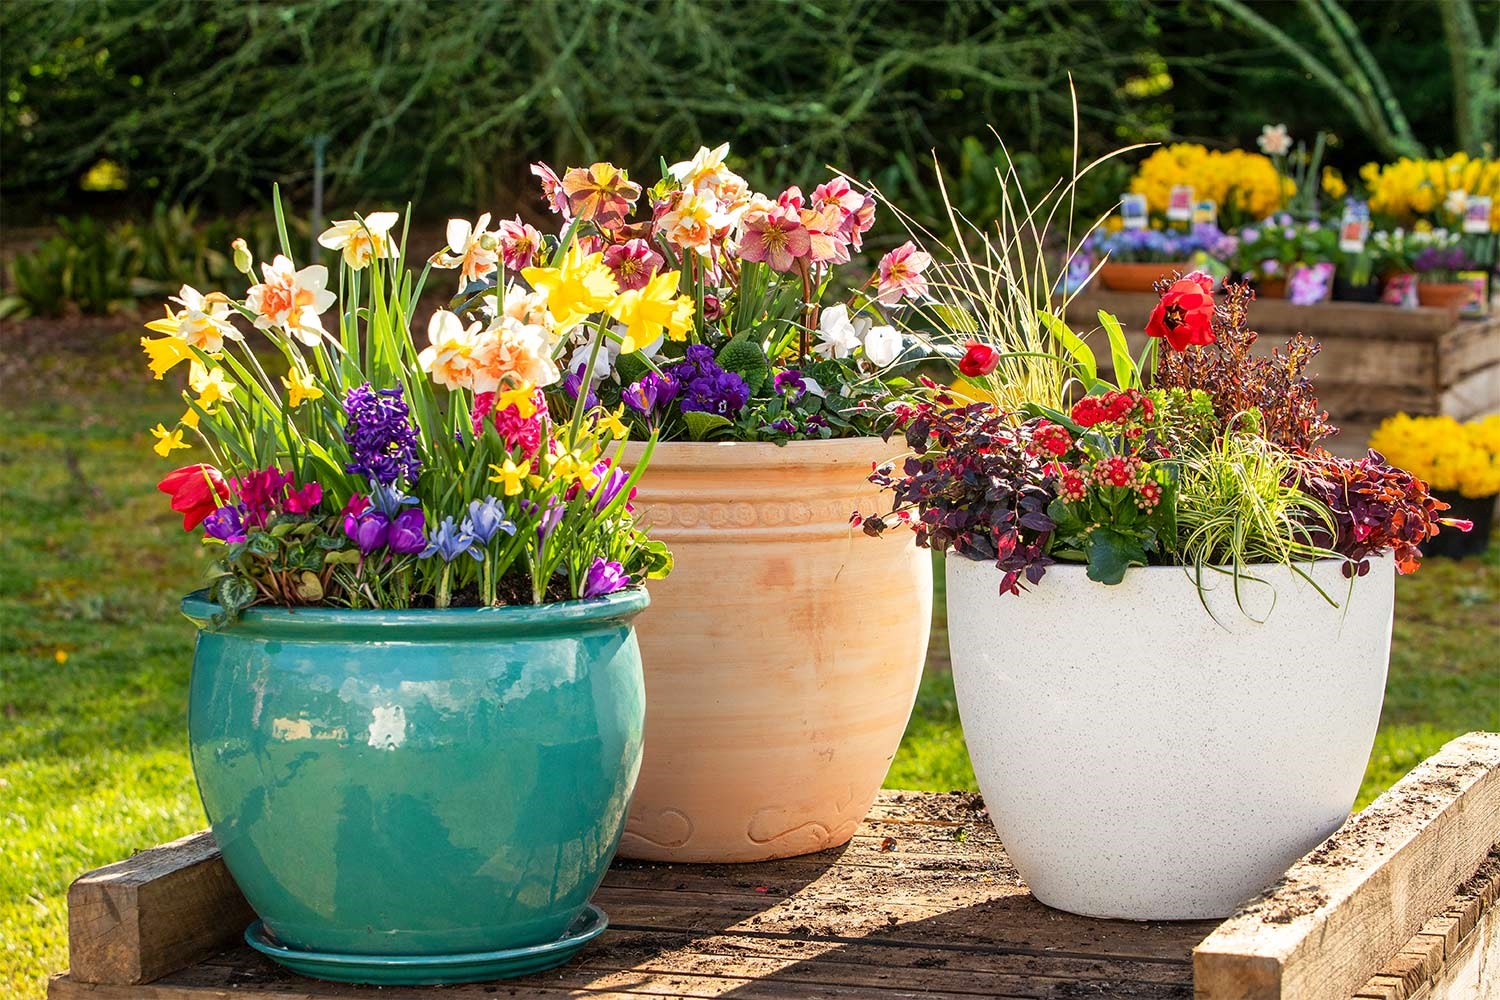 How to make beautiful flower pots at home | Better Homes and Gardens